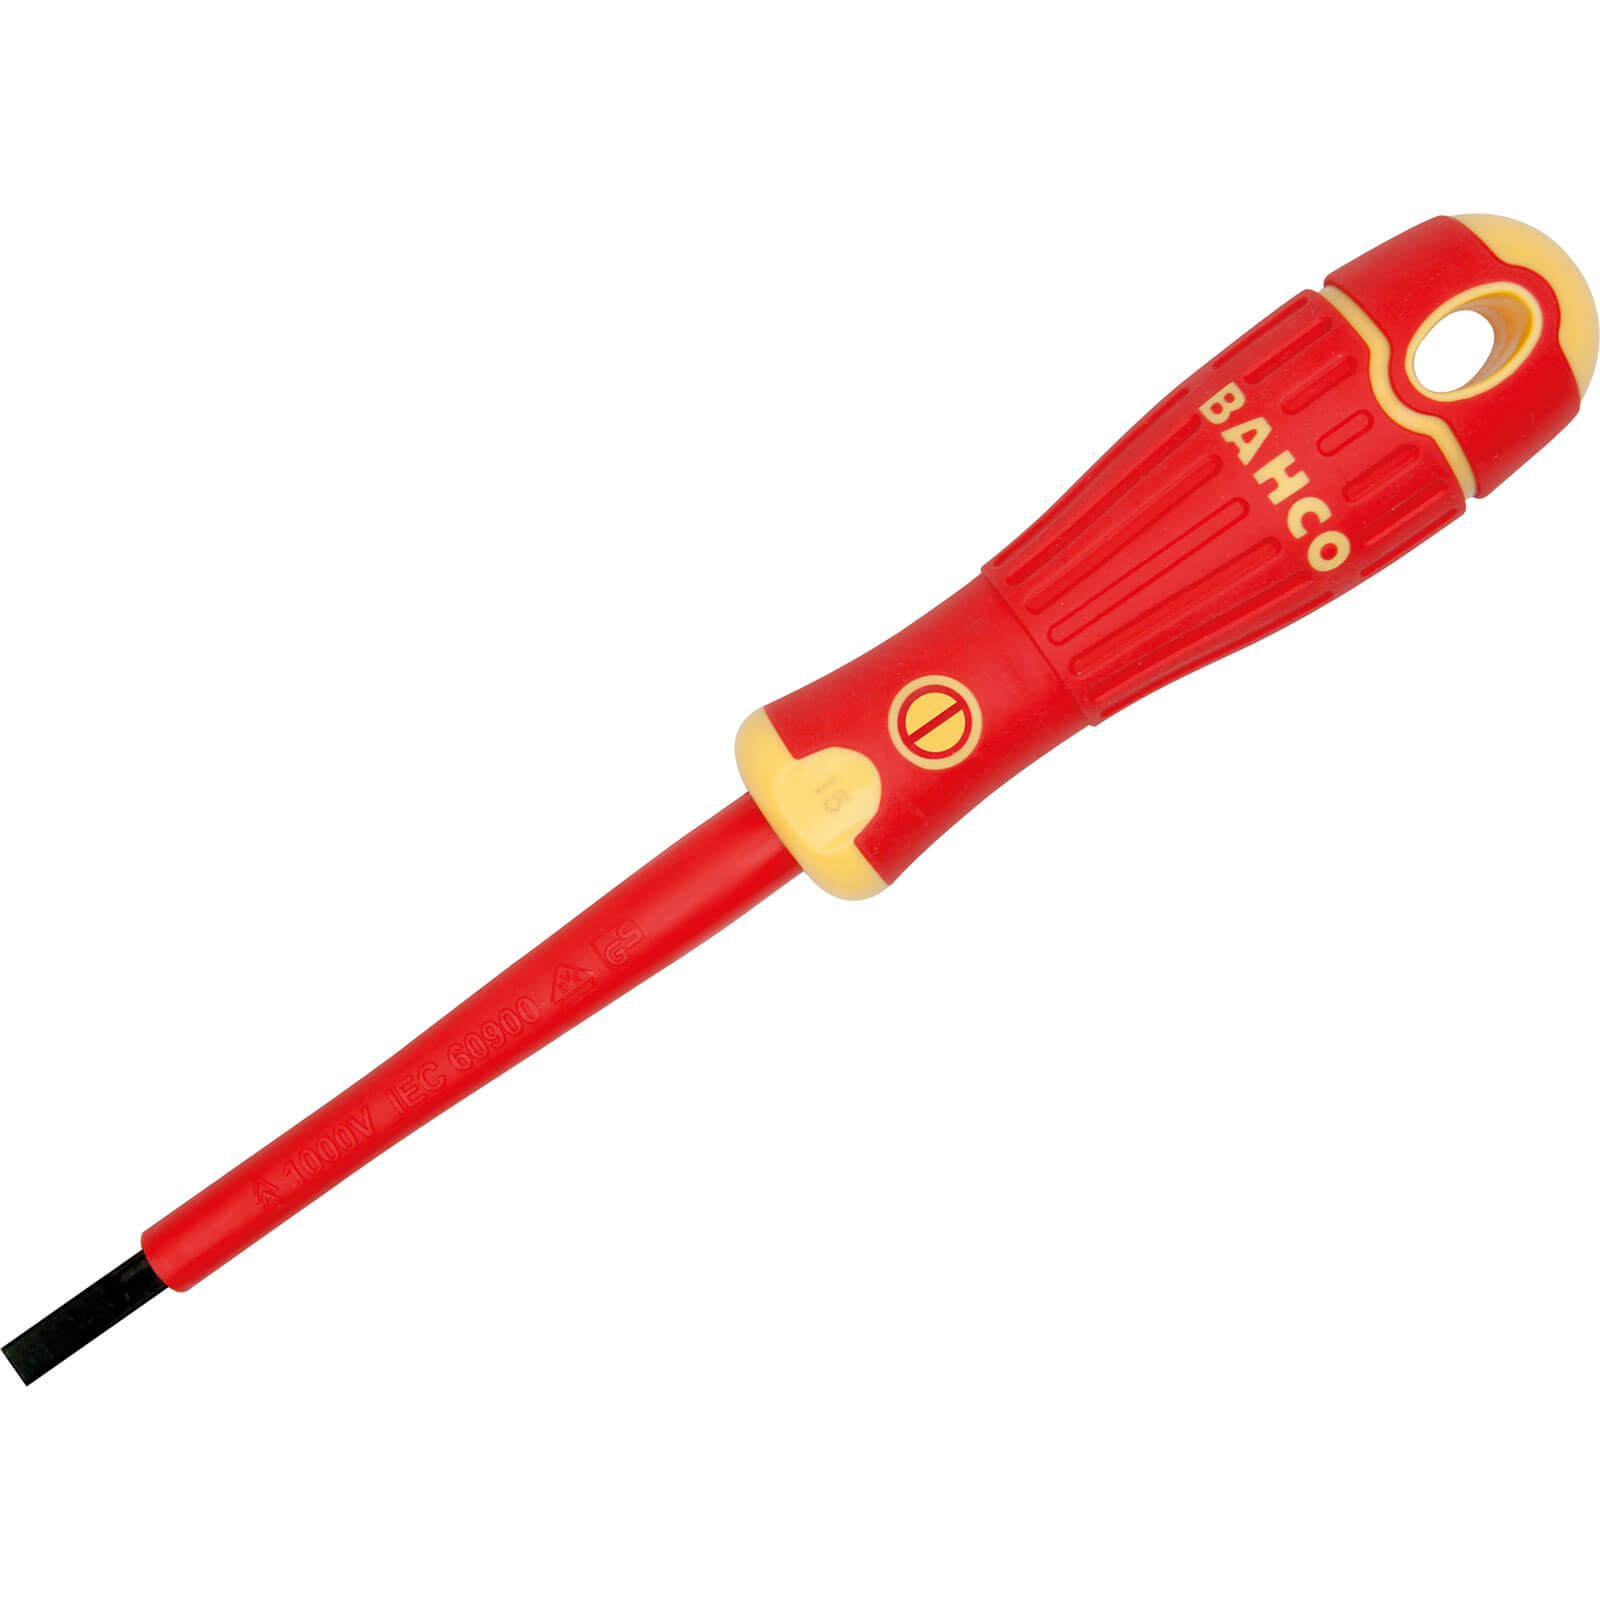 Photo of Bahco Vde Insulated Slotted Screwdriver 8mm 175mm